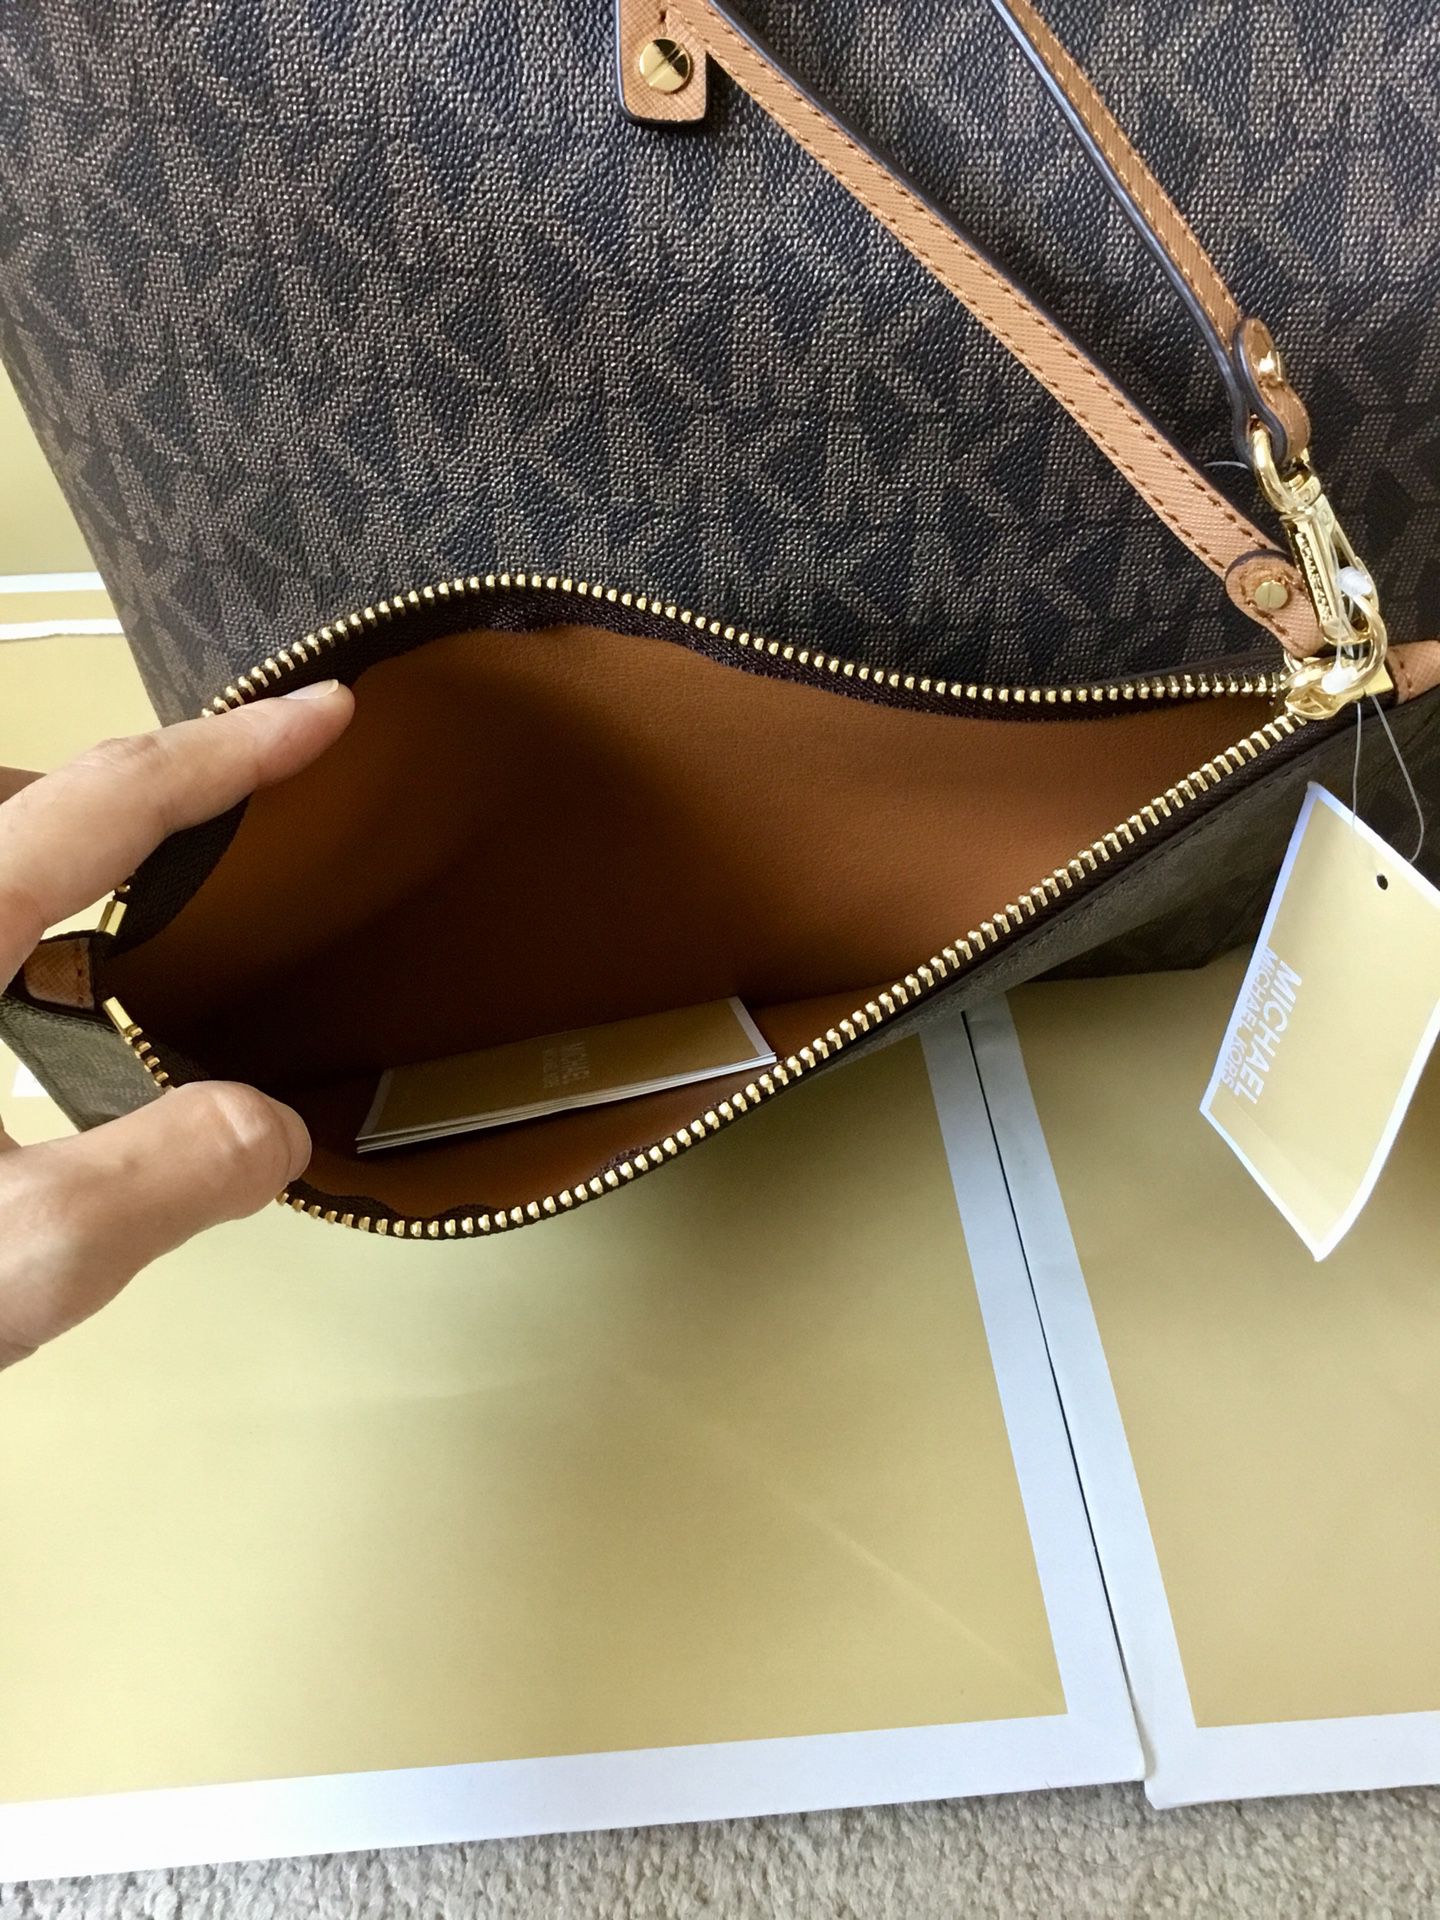 Authentic Michael Kors Large Speedy Bag for Sale in Costa Mesa, CA - OfferUp